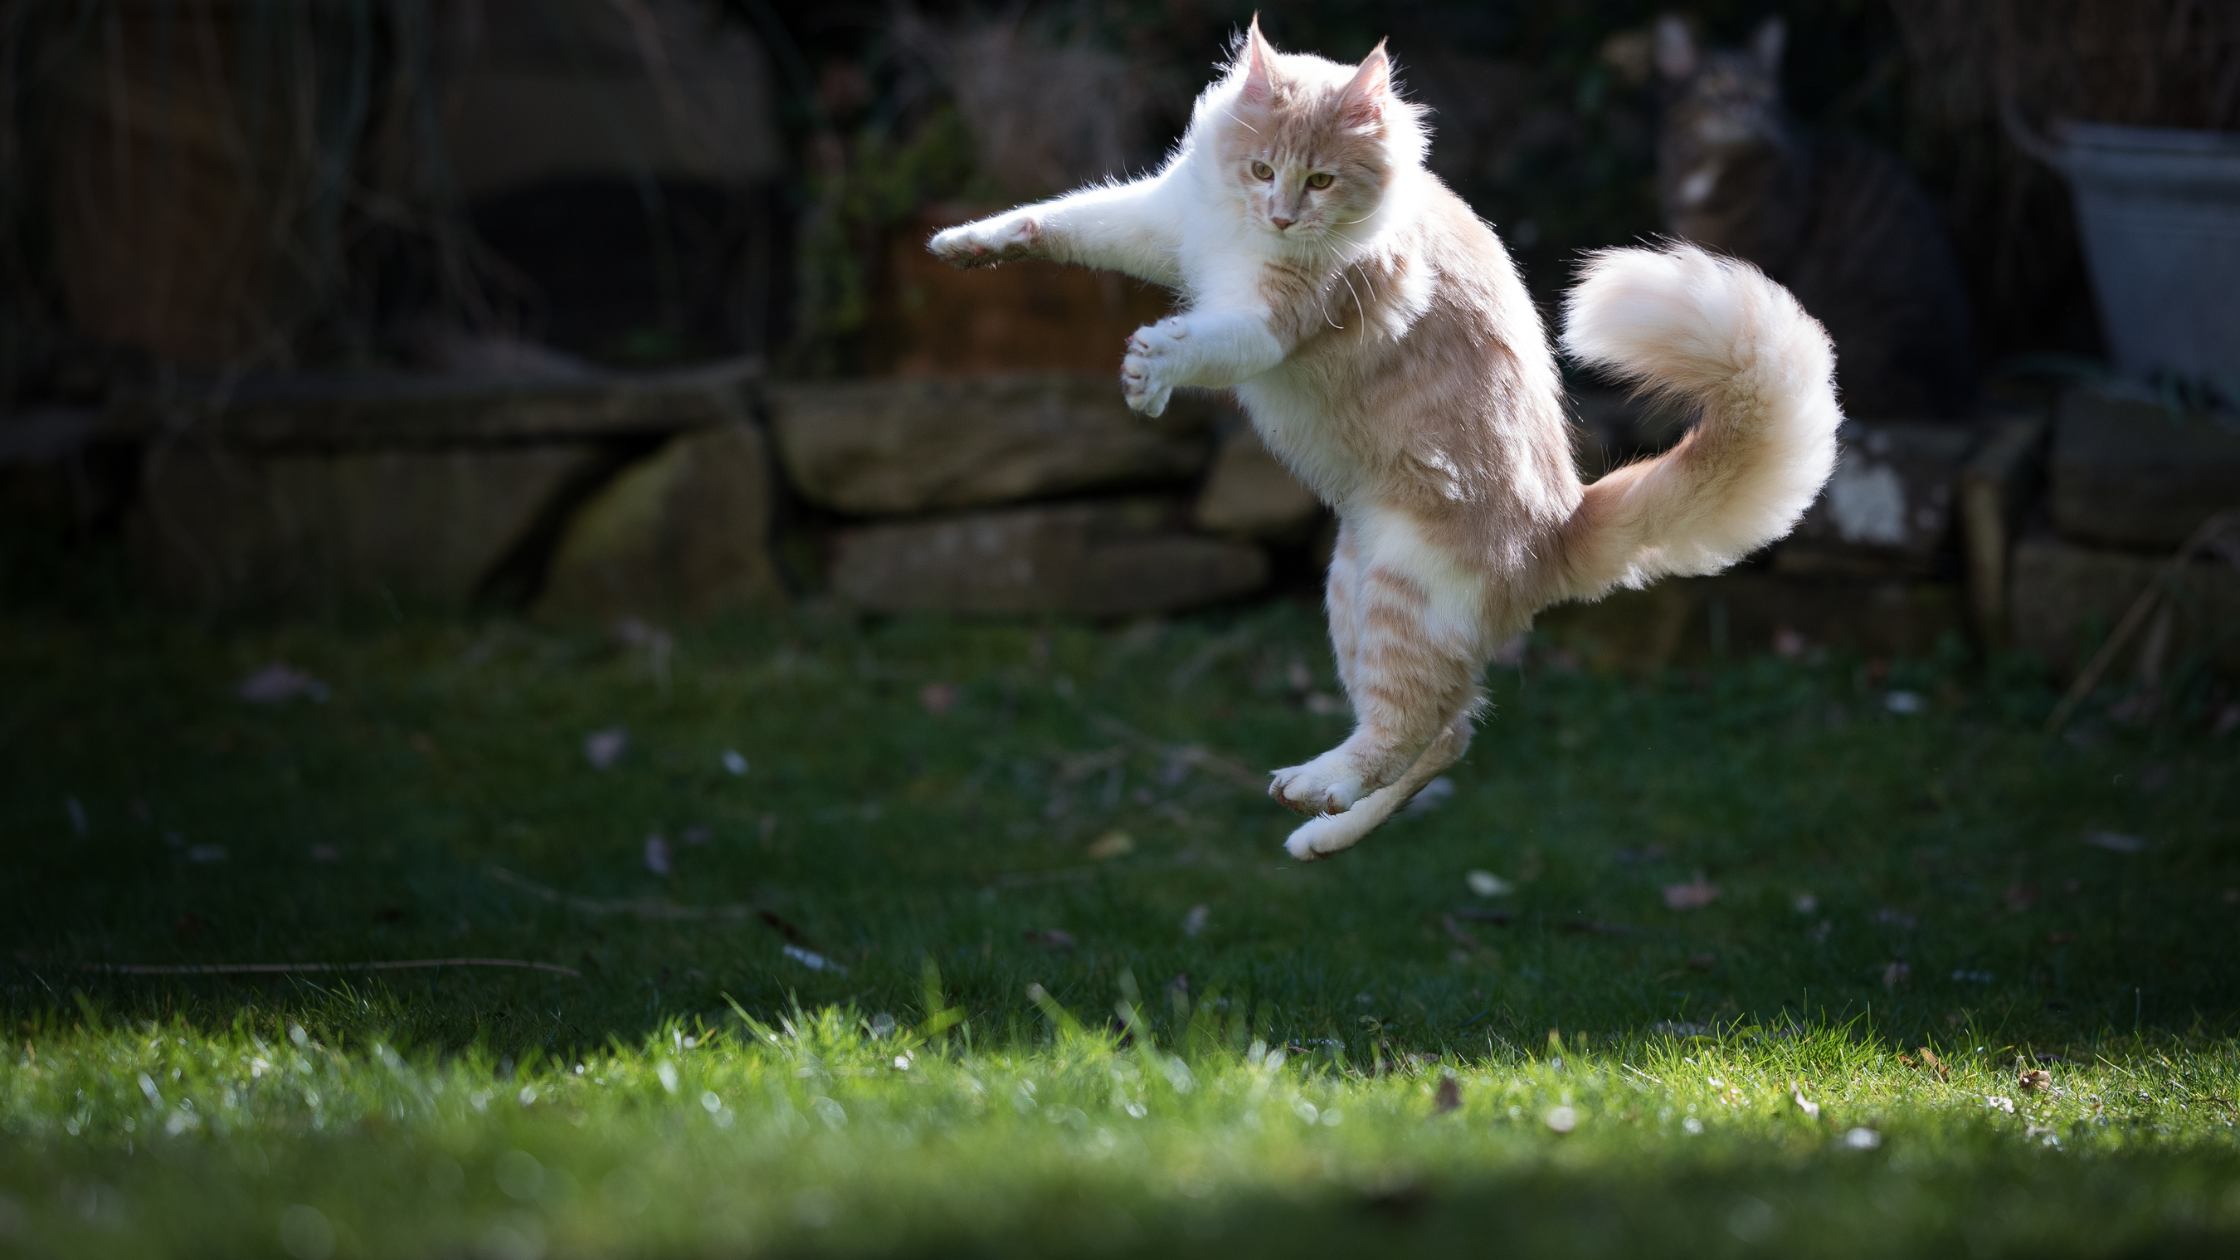 cats have incredible jumping abilities